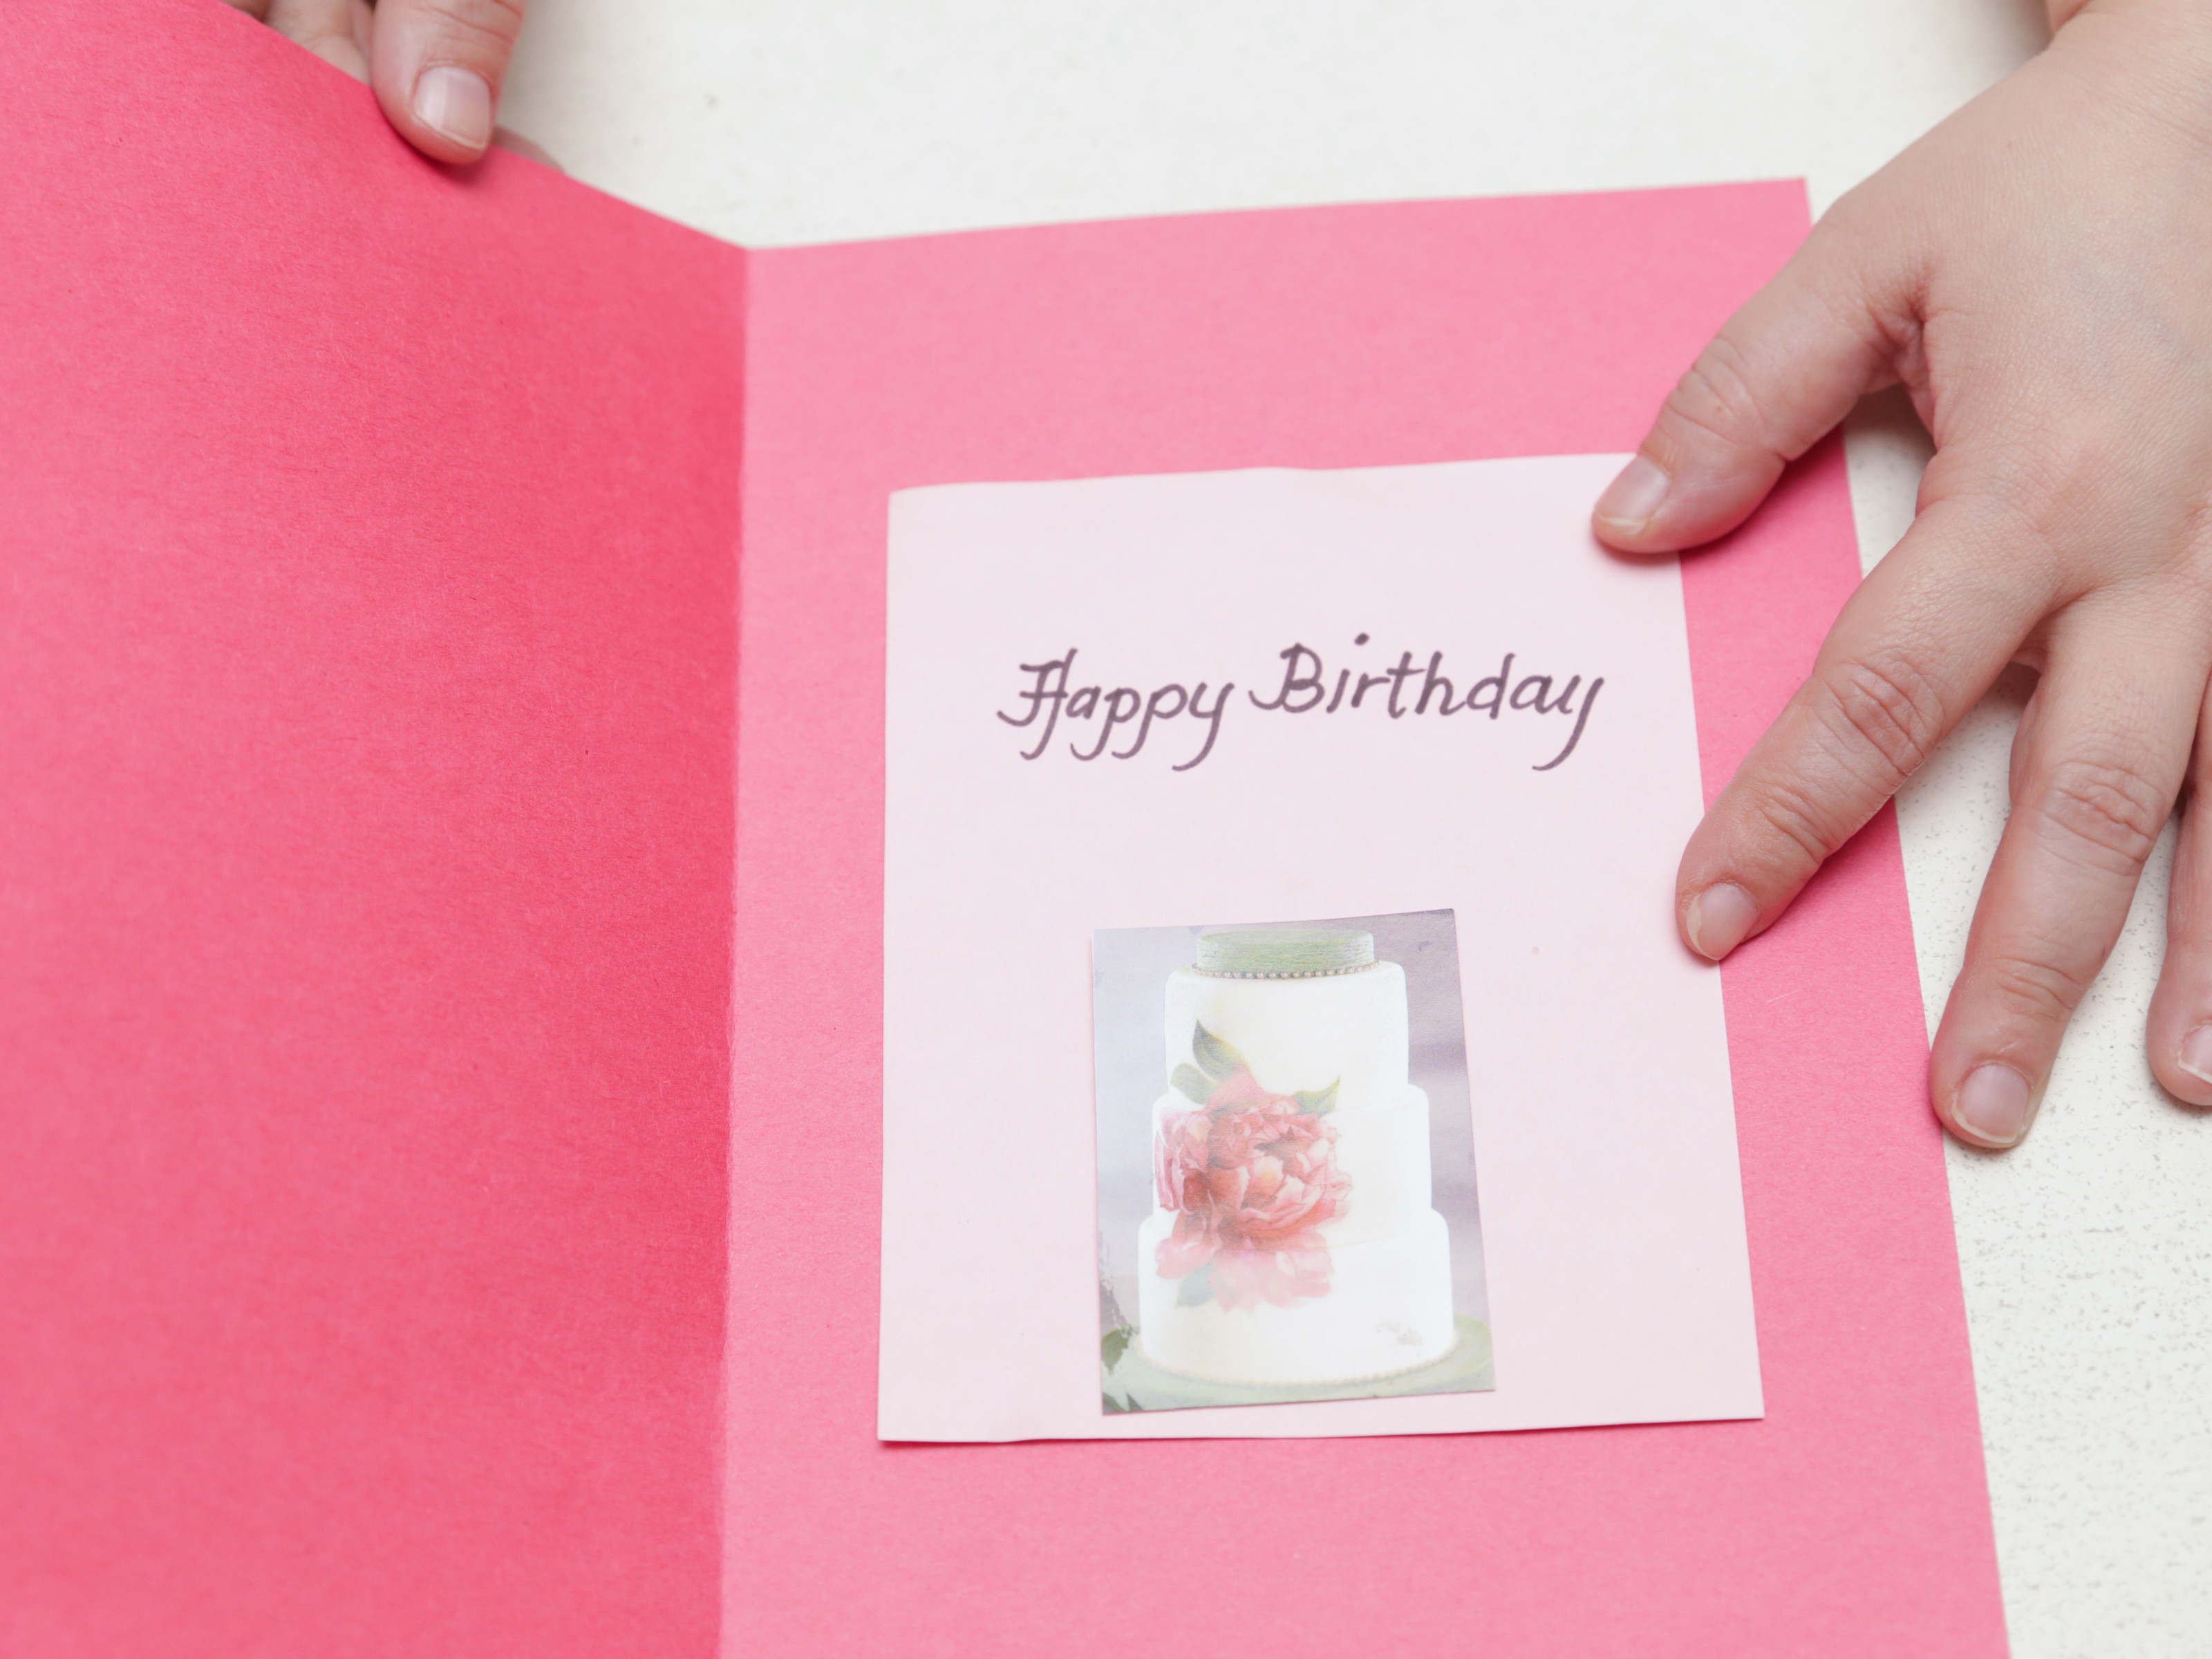 Best ideas about Make Birthday Card With Photo
. Save or Pin 4 Ways to Make a Simple Birthday Card at Home wikiHow Now.